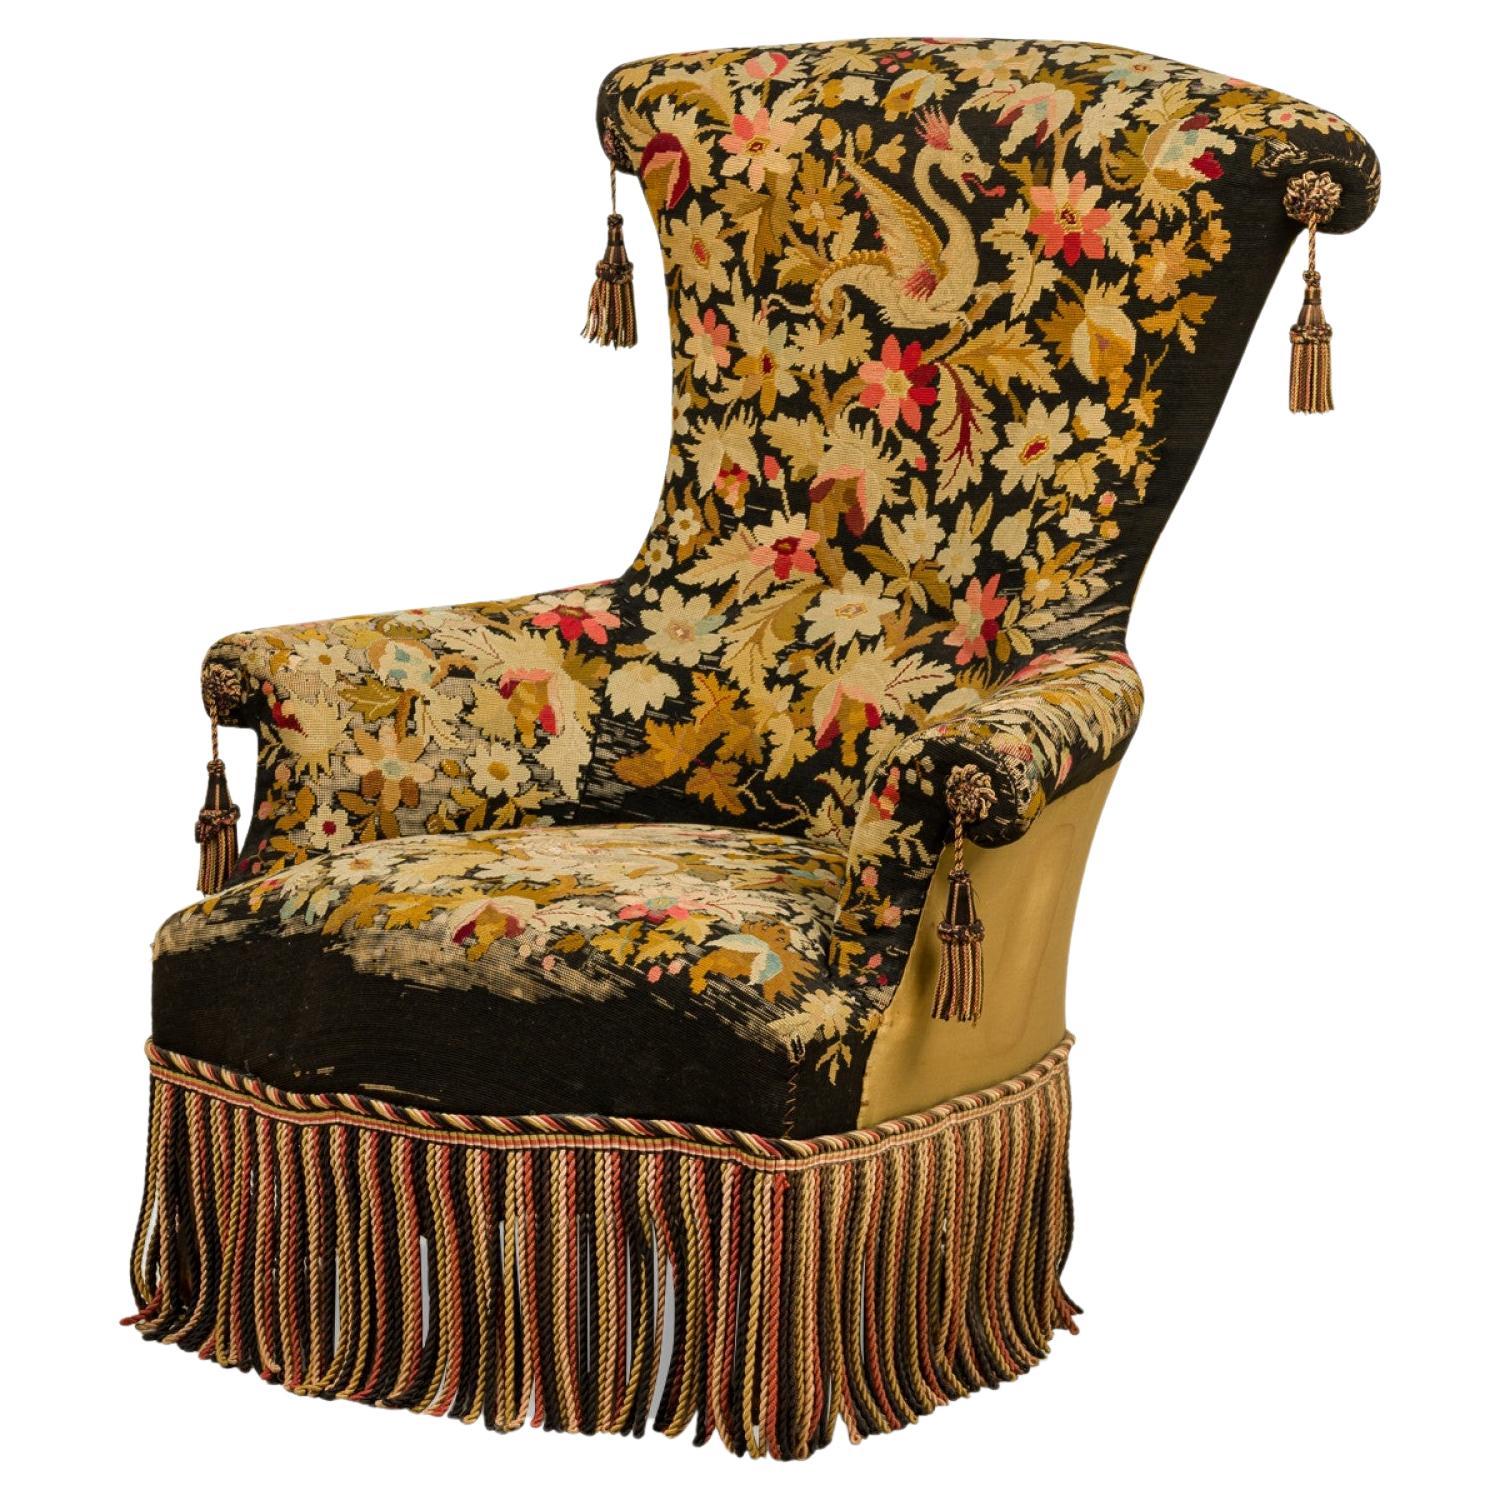 French Victorian Floral Needlepoint Upholstered Rope Fringe Trimmed Armchair